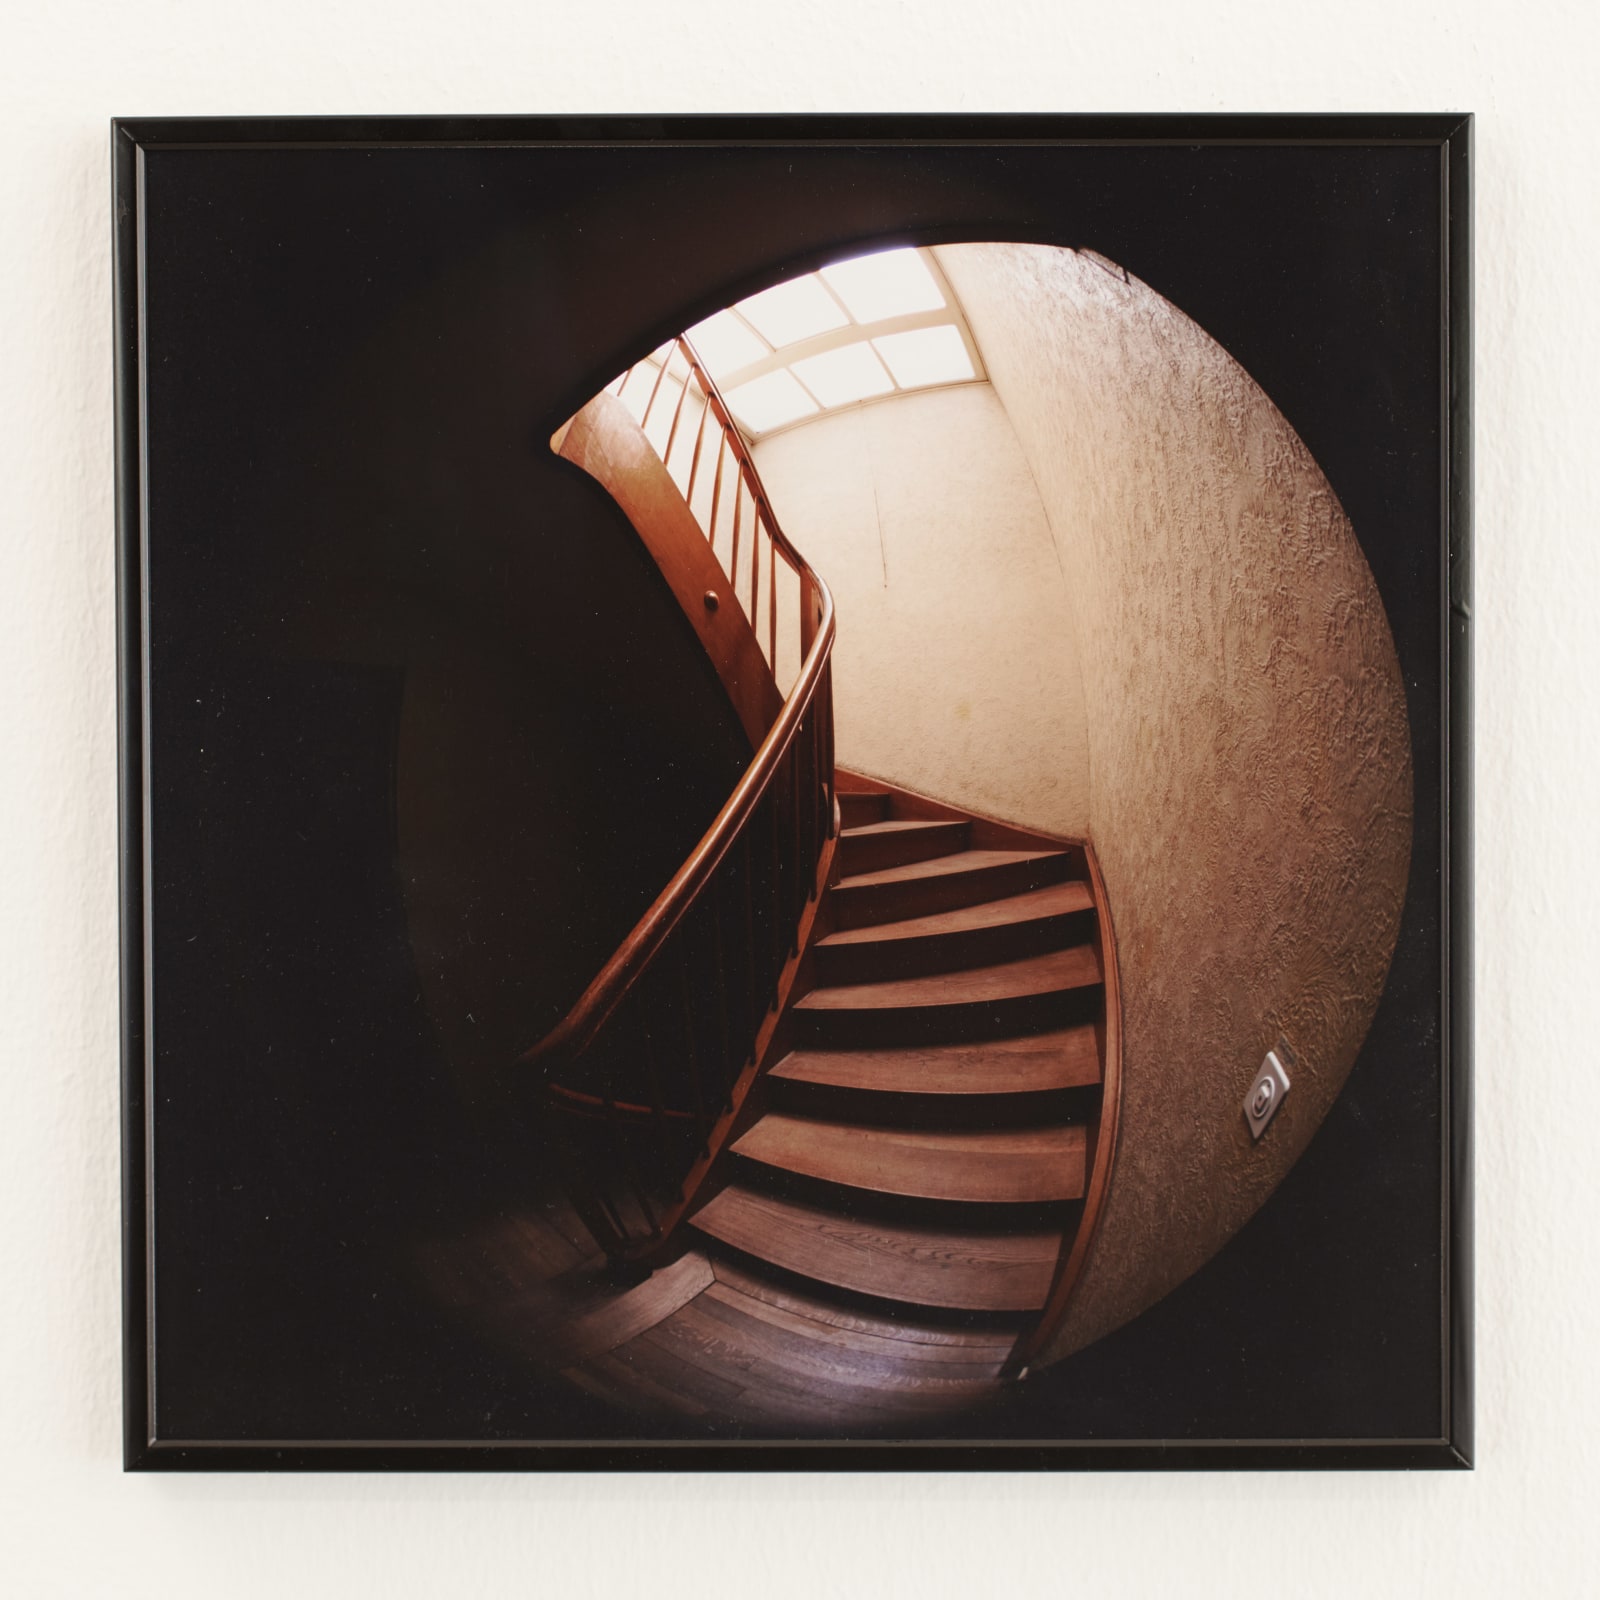 Emanuel Rossetti, Stairs, 2020